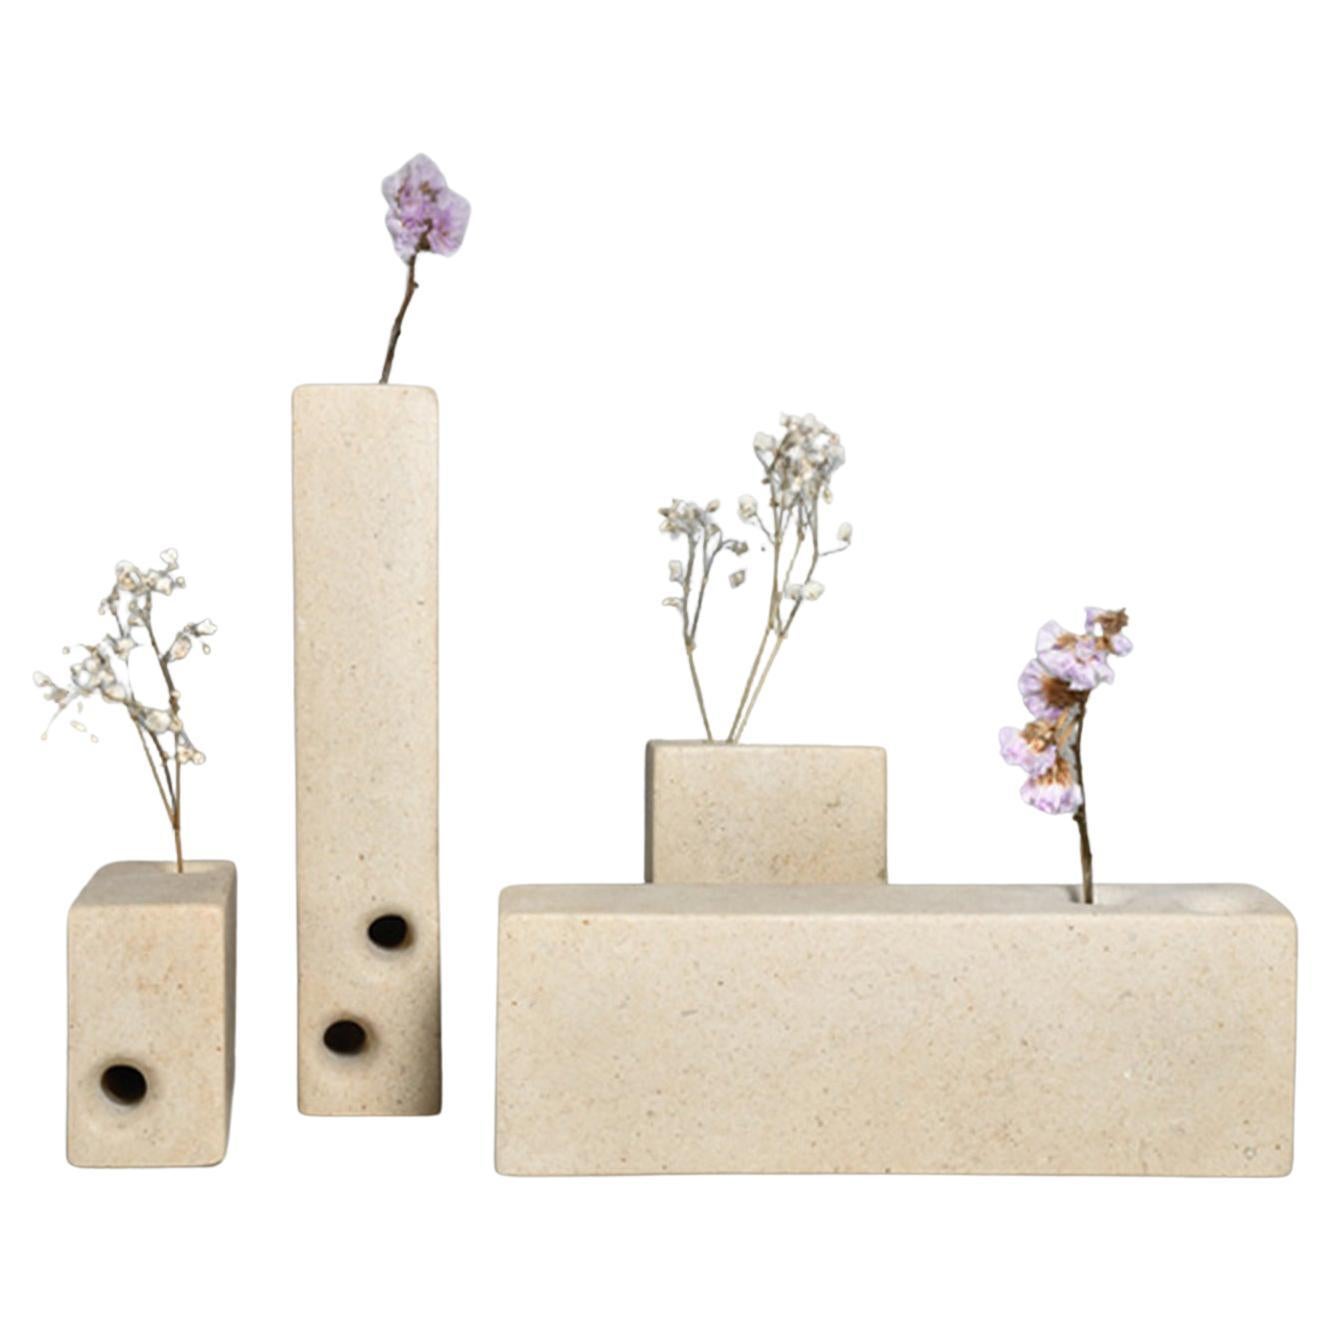 21st Century by Marco Marino"LEGO" Marble Vases Centerpieces in White Carrara